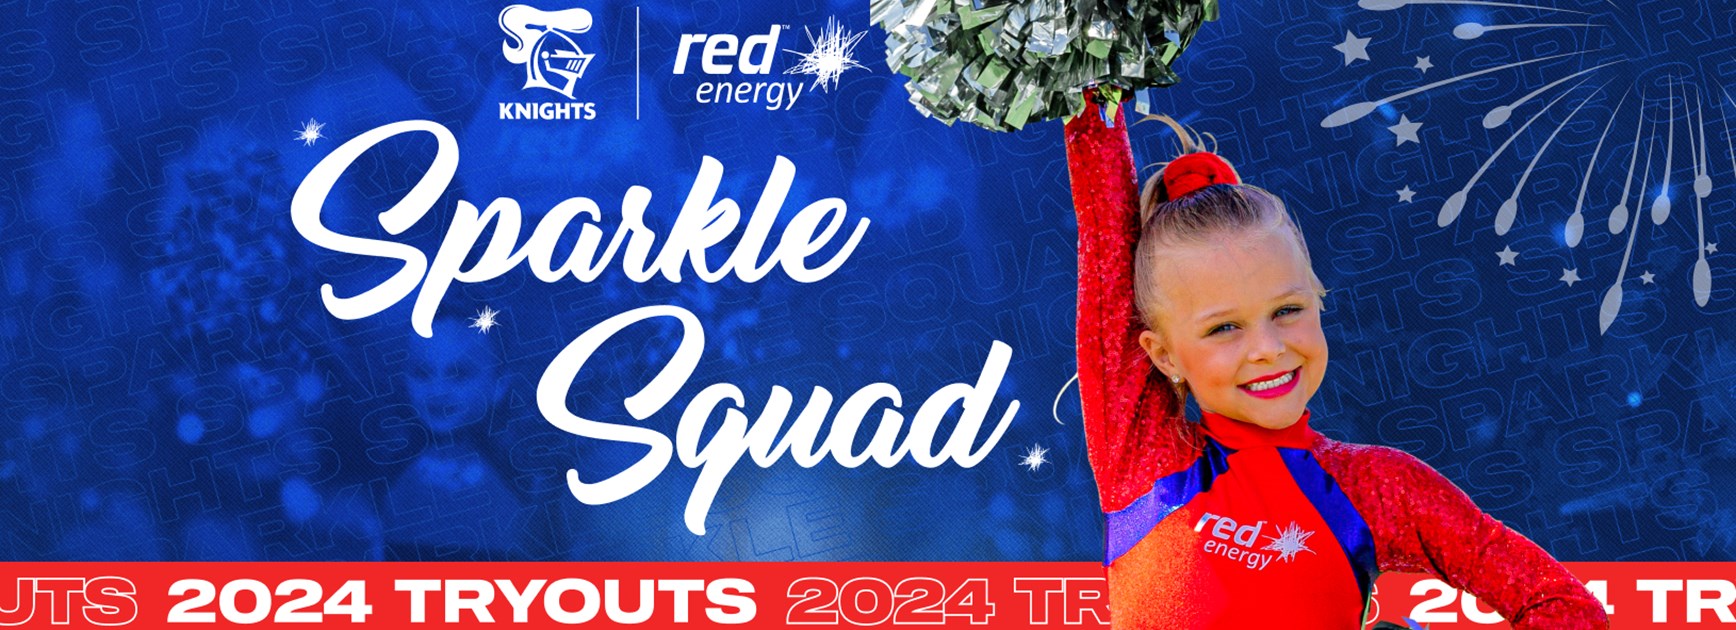 2024 Sparkle Squad Tryouts